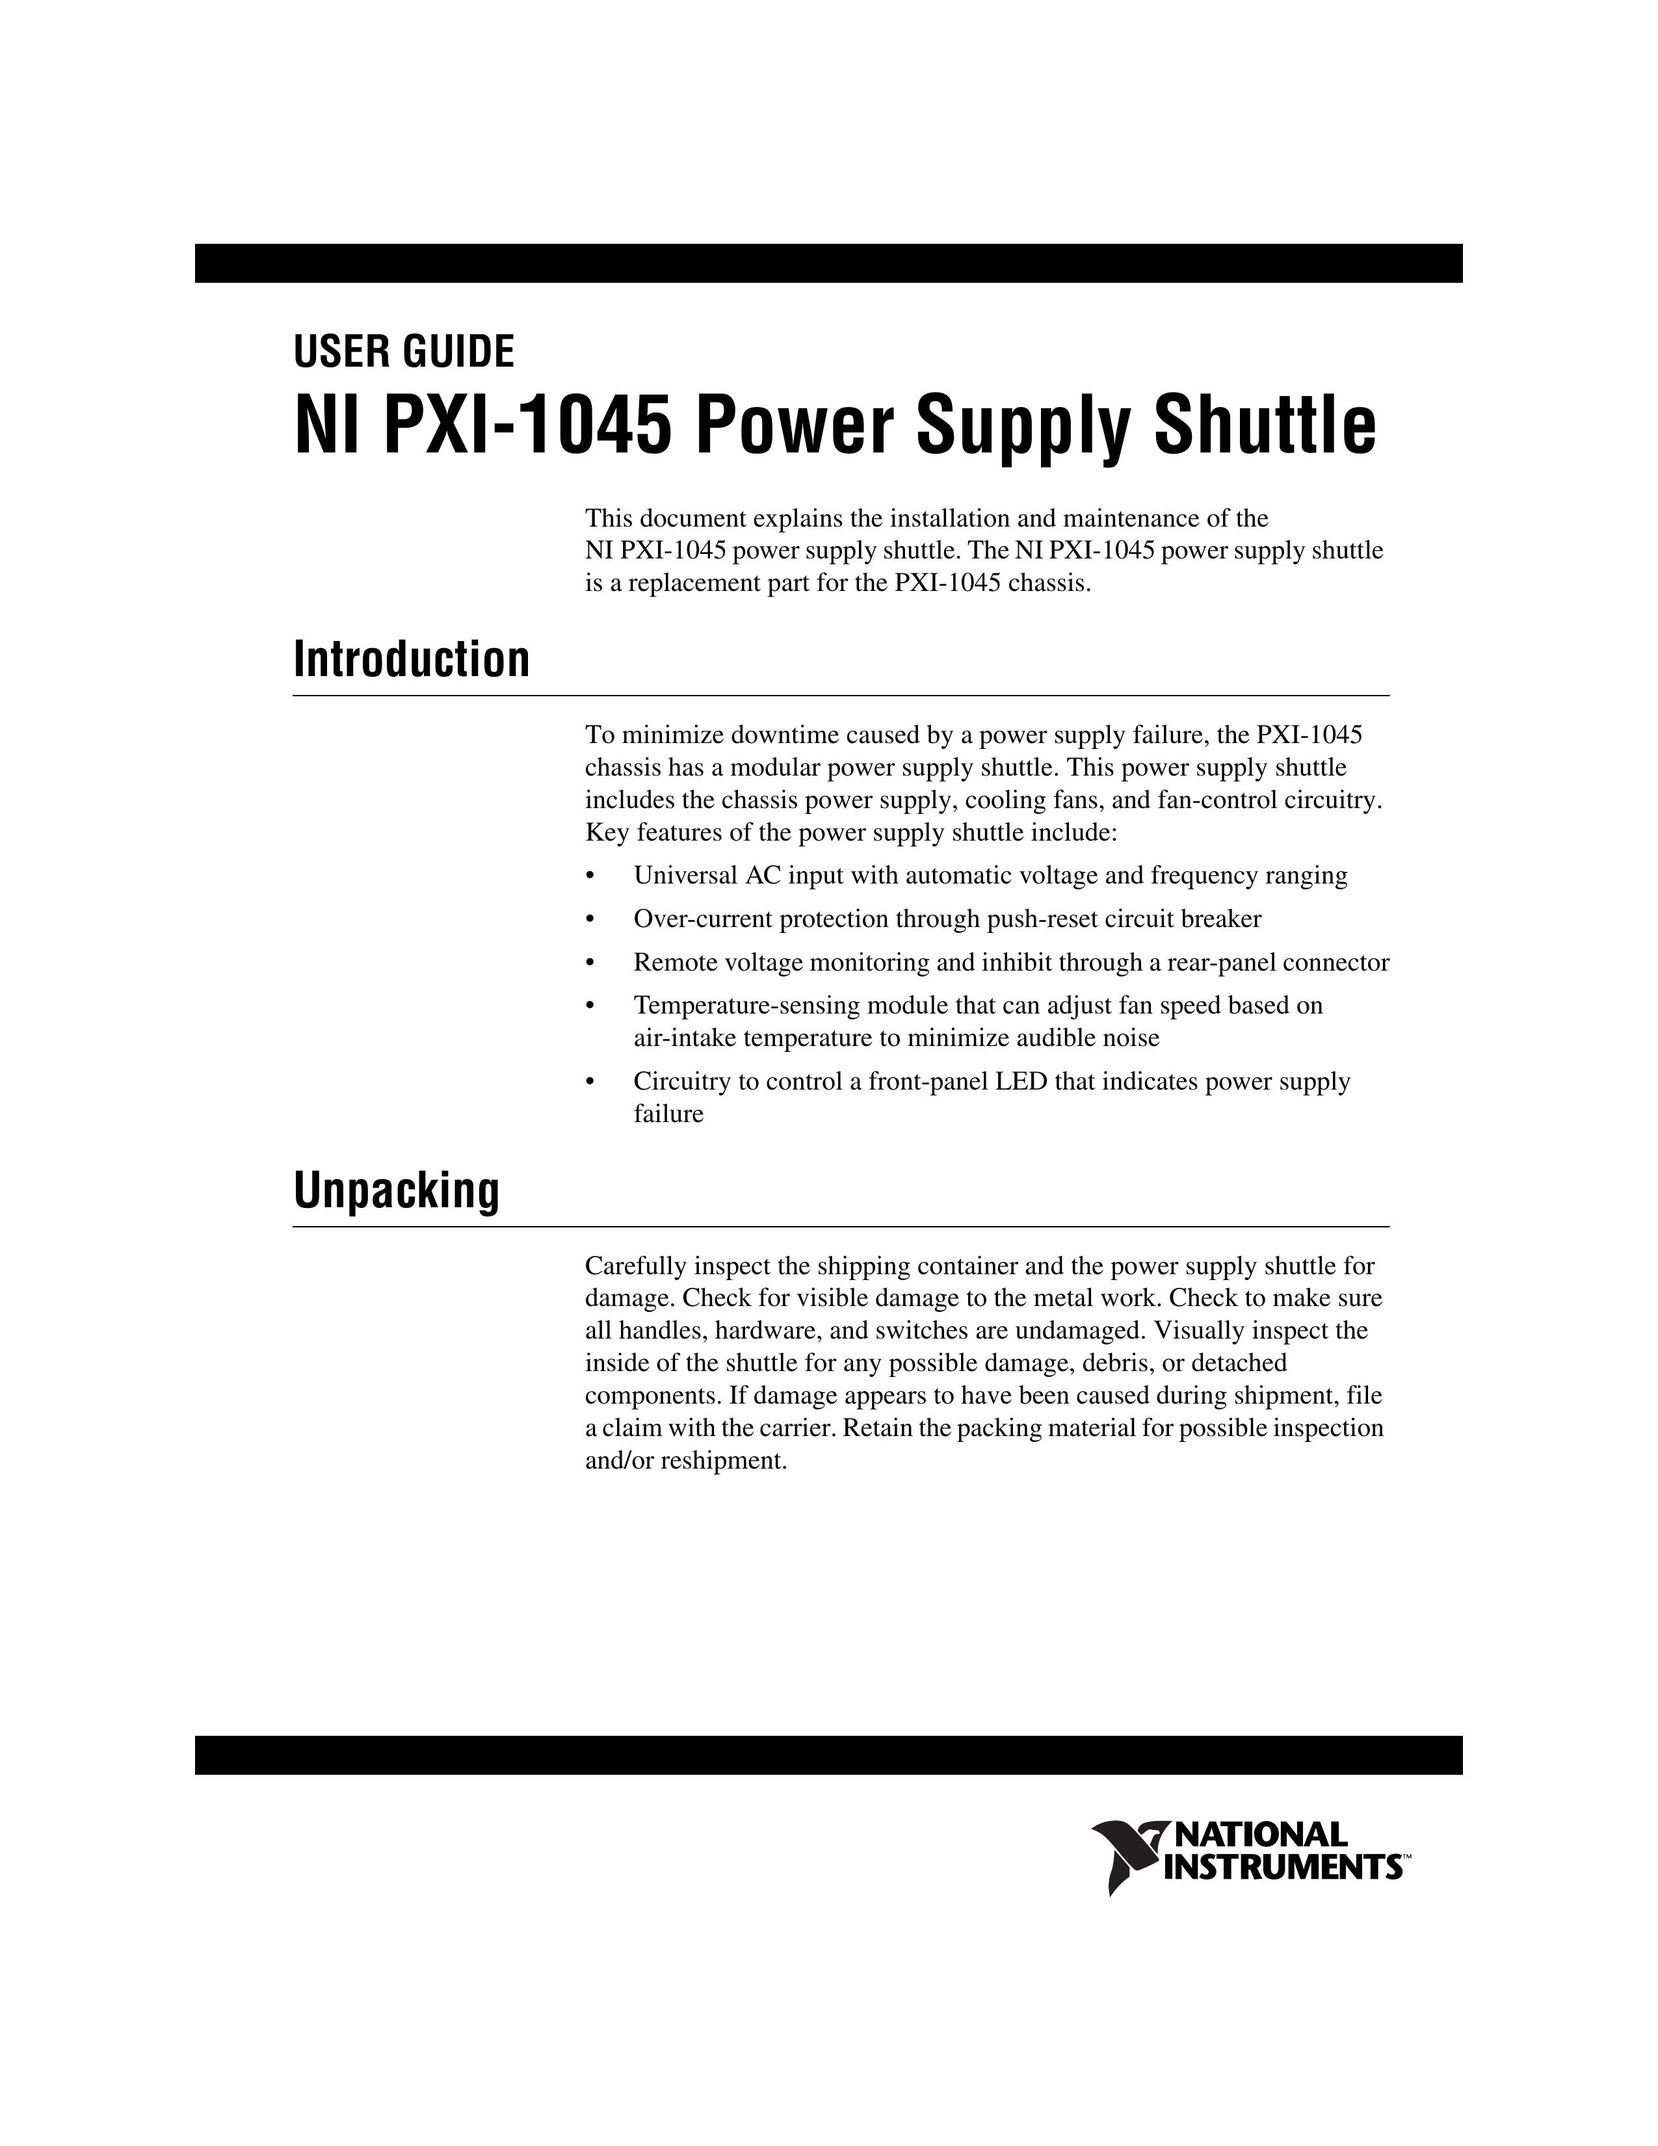 National Instruments PXI-1045 Power Supply User Manual